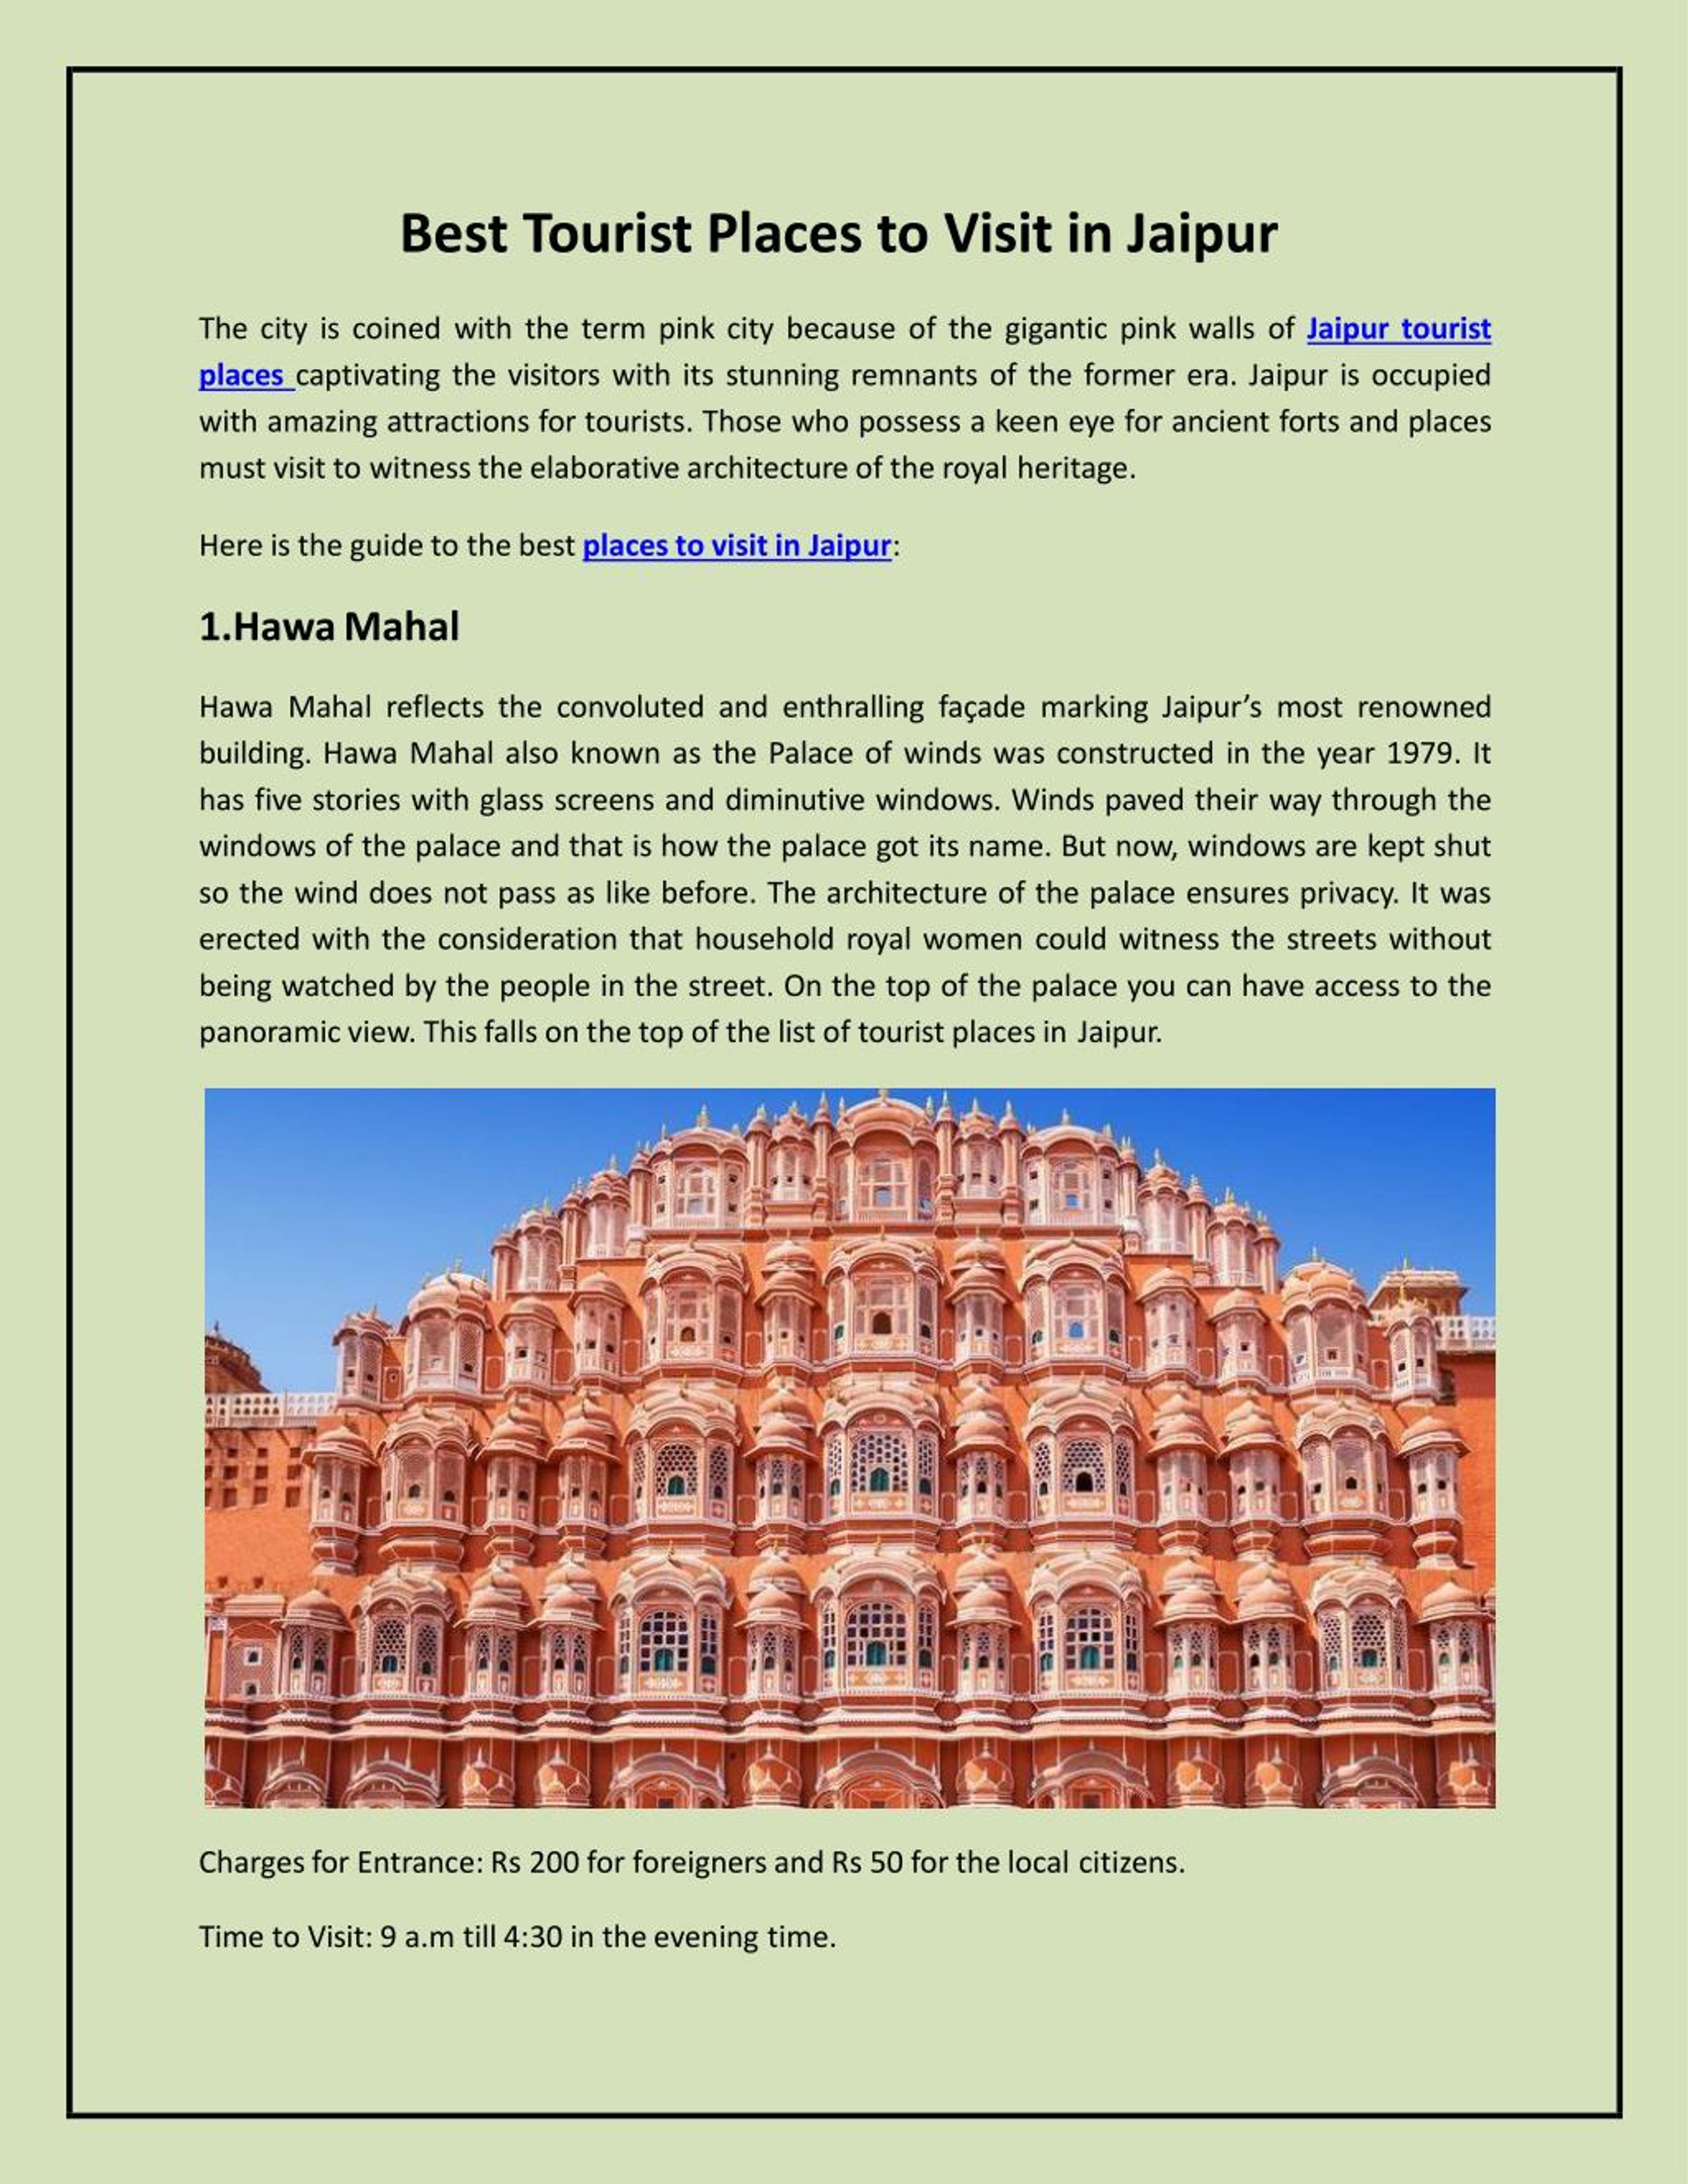 PPT - Best tourist places to visit in Jaipur PowerPoint Presentation ...